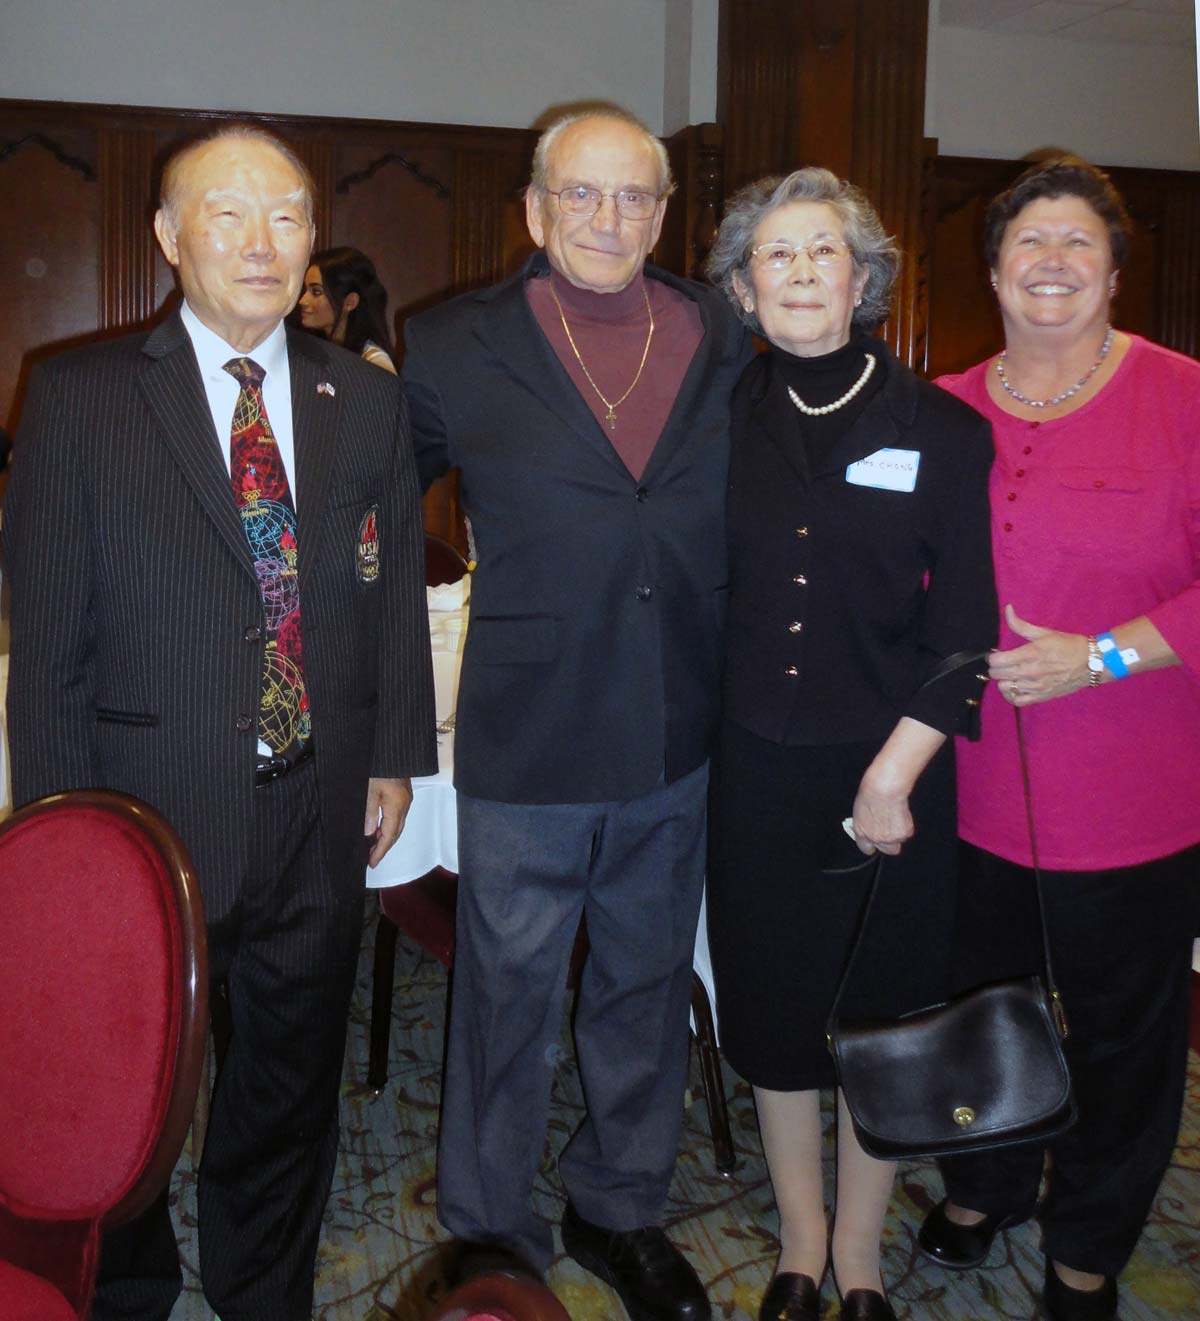 Dr. Dennis  and Mrs. Louis Burke stand beside Grand Master and Mrs. Hwa Chong at the U-Michigan Taekwondo Club’s 50th anniversary dinner on 4 October, 2014